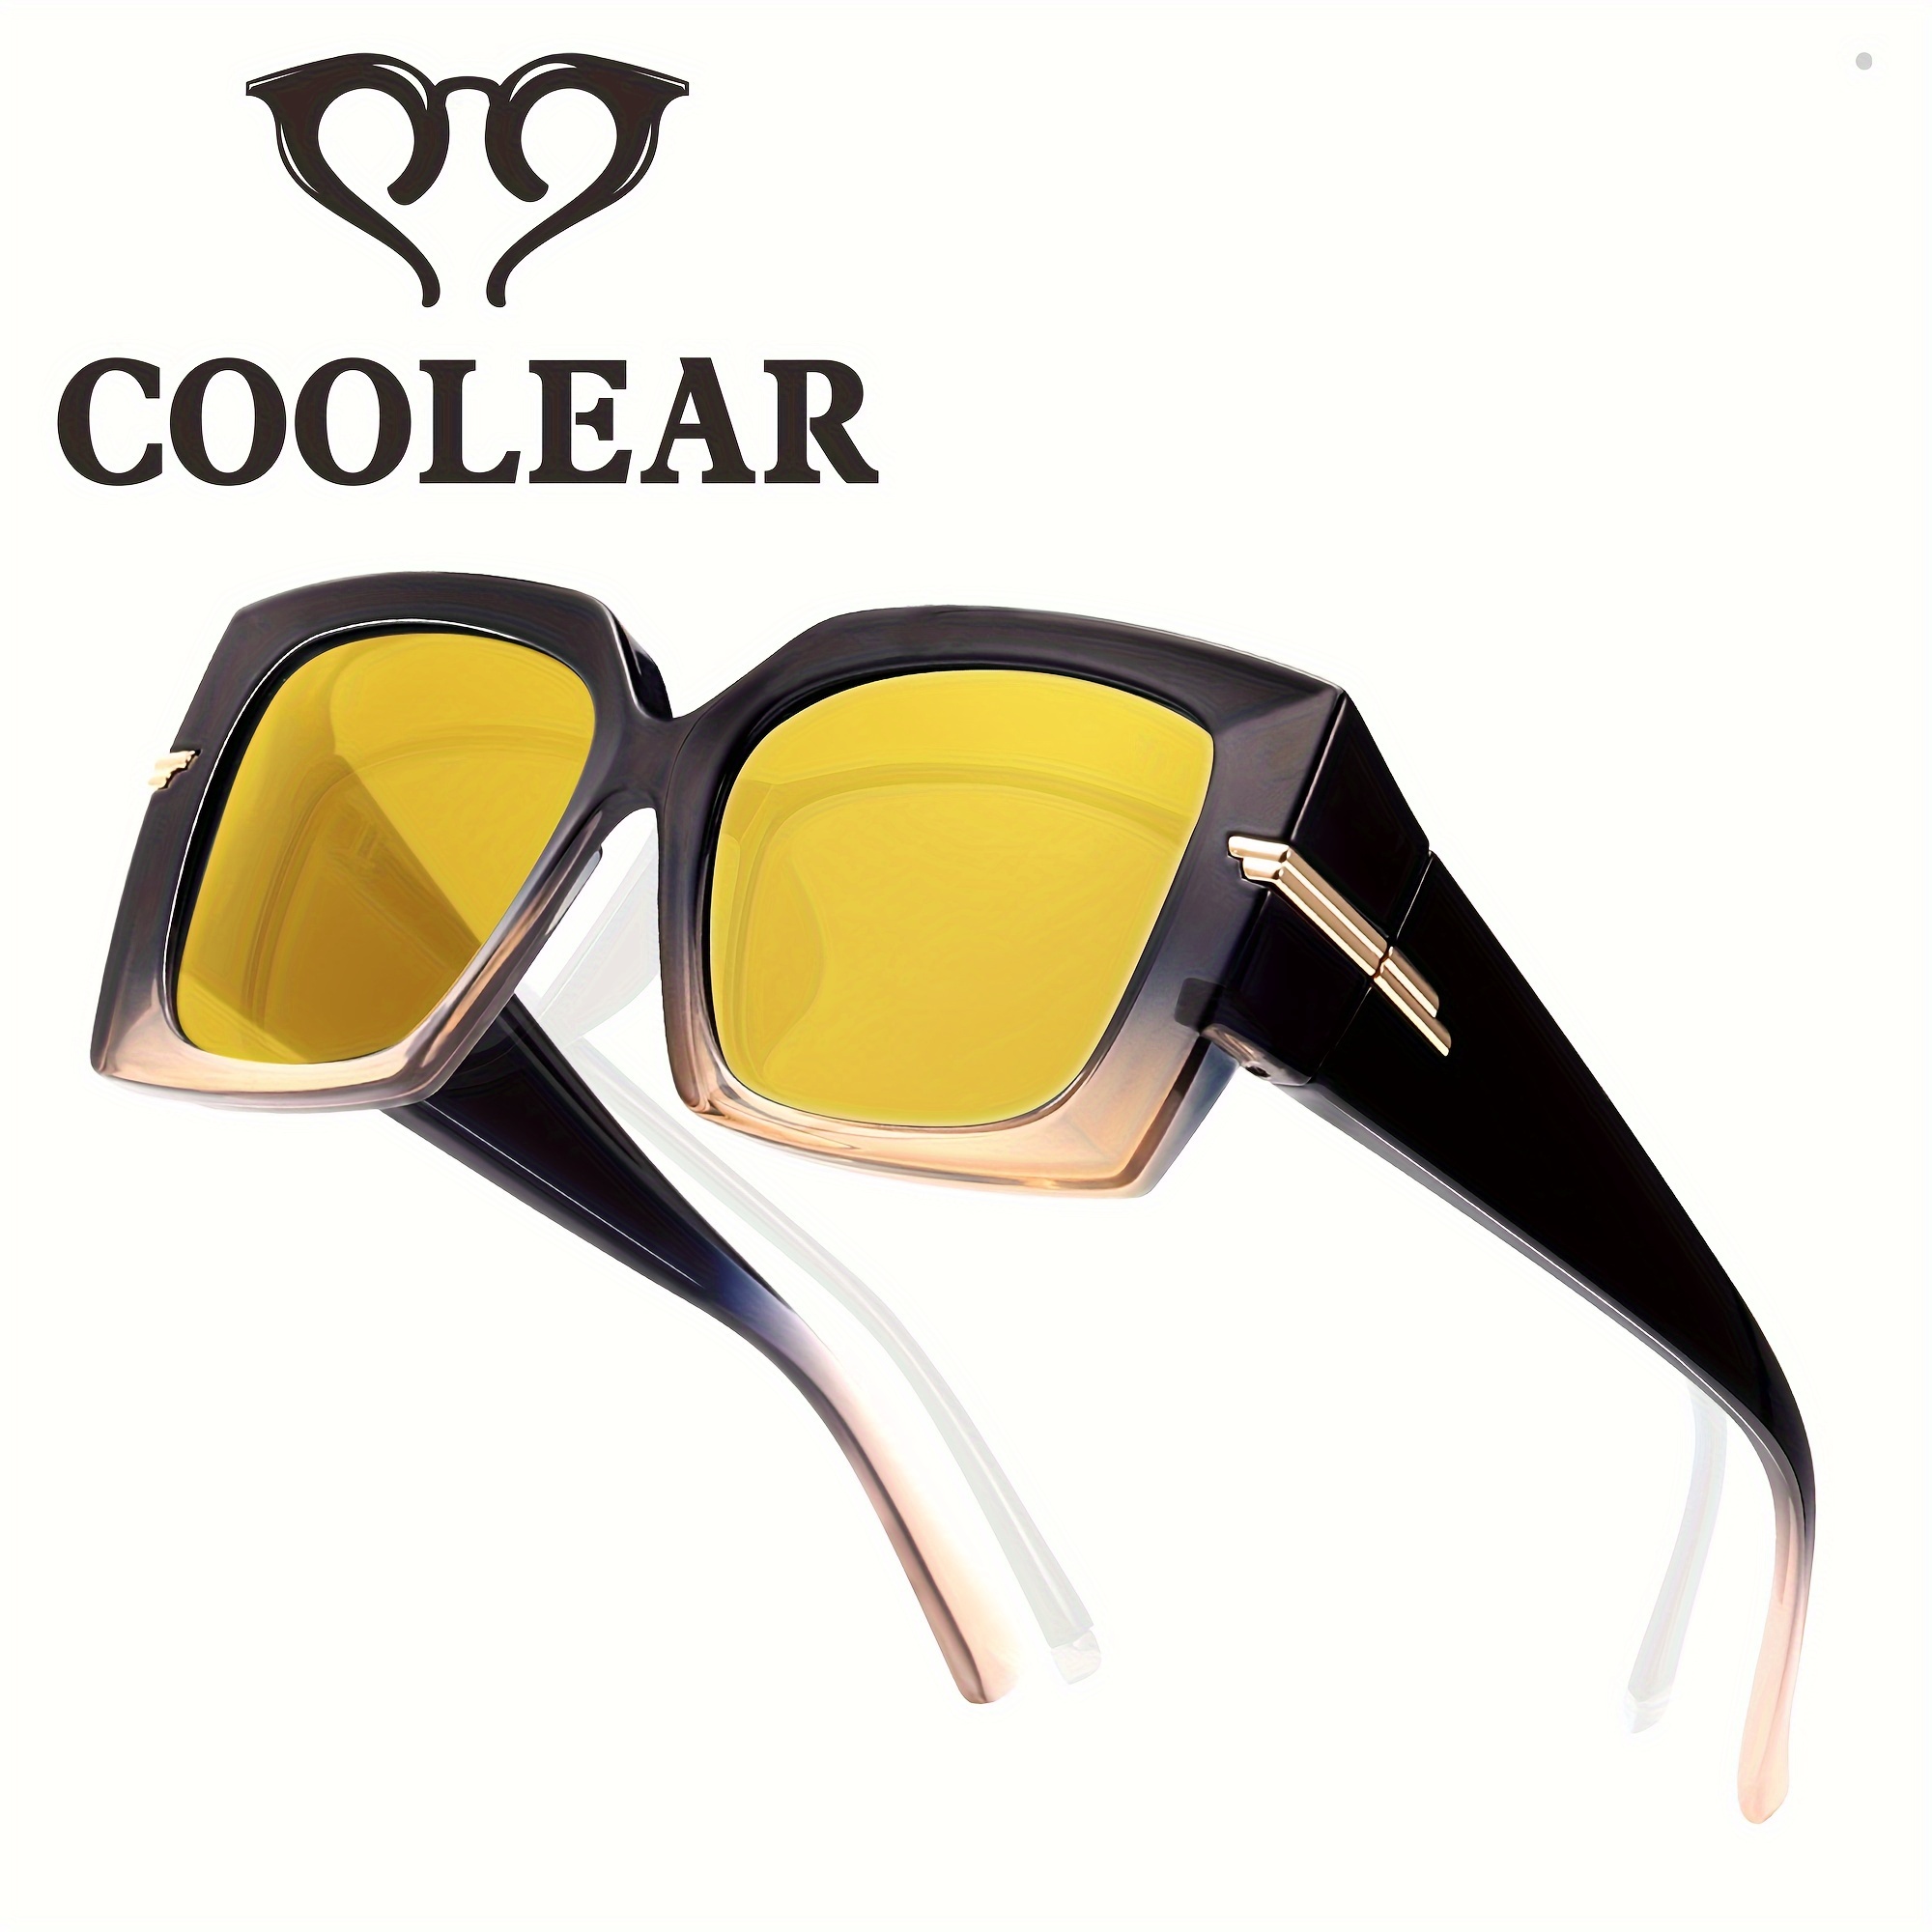 

Coolear Oversized Women For Driving Fit Over Glasses With Polarized Yellow Tinted Lenses Ln7519